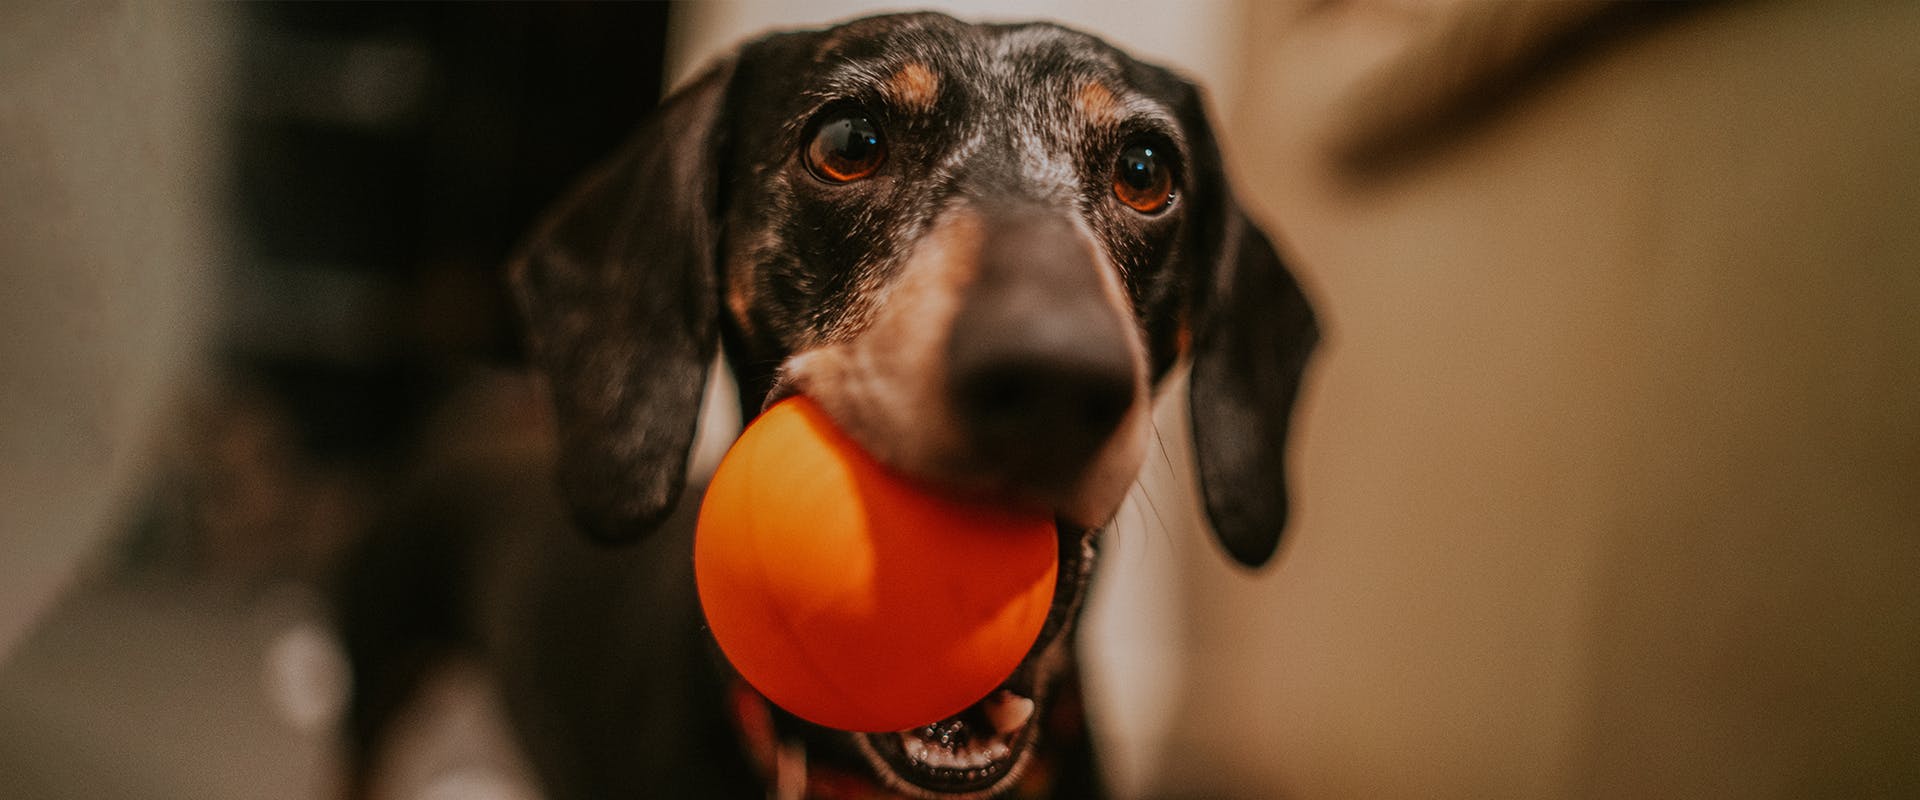 A cute Dachshund dog with an orange ball in its mouth